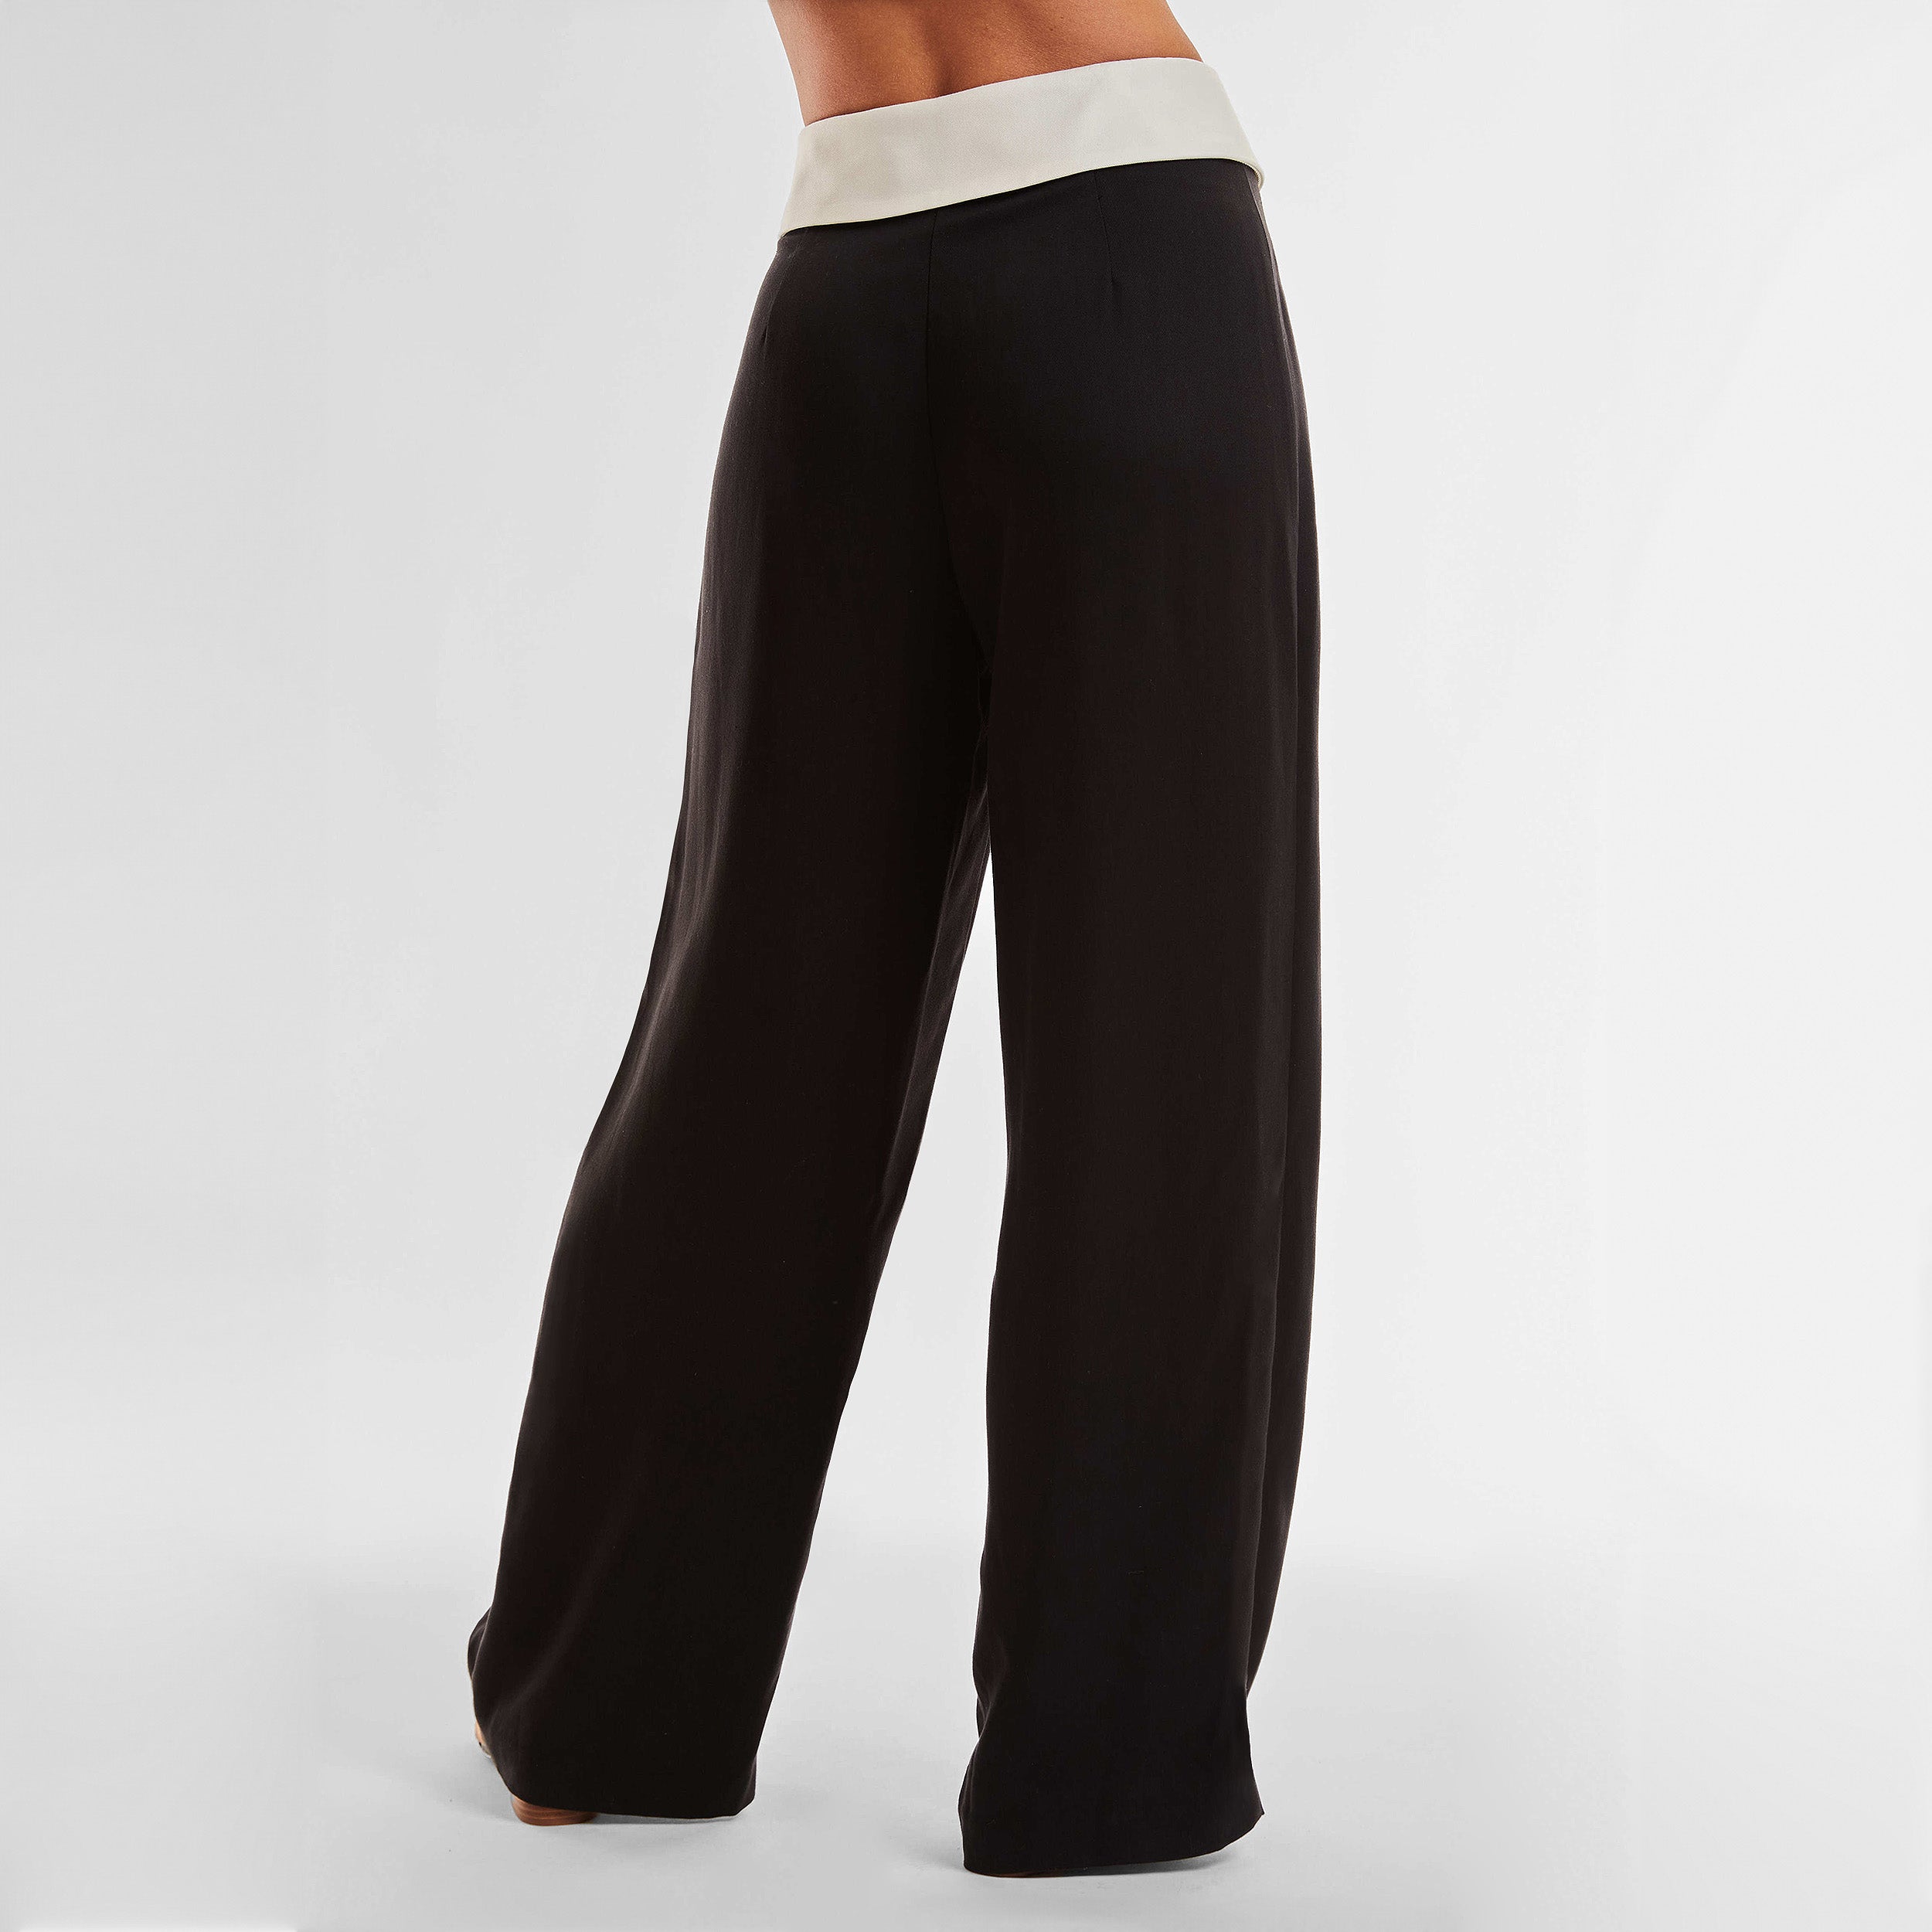 Rear view of woman wearing black trousers with white foldover waistband detail.